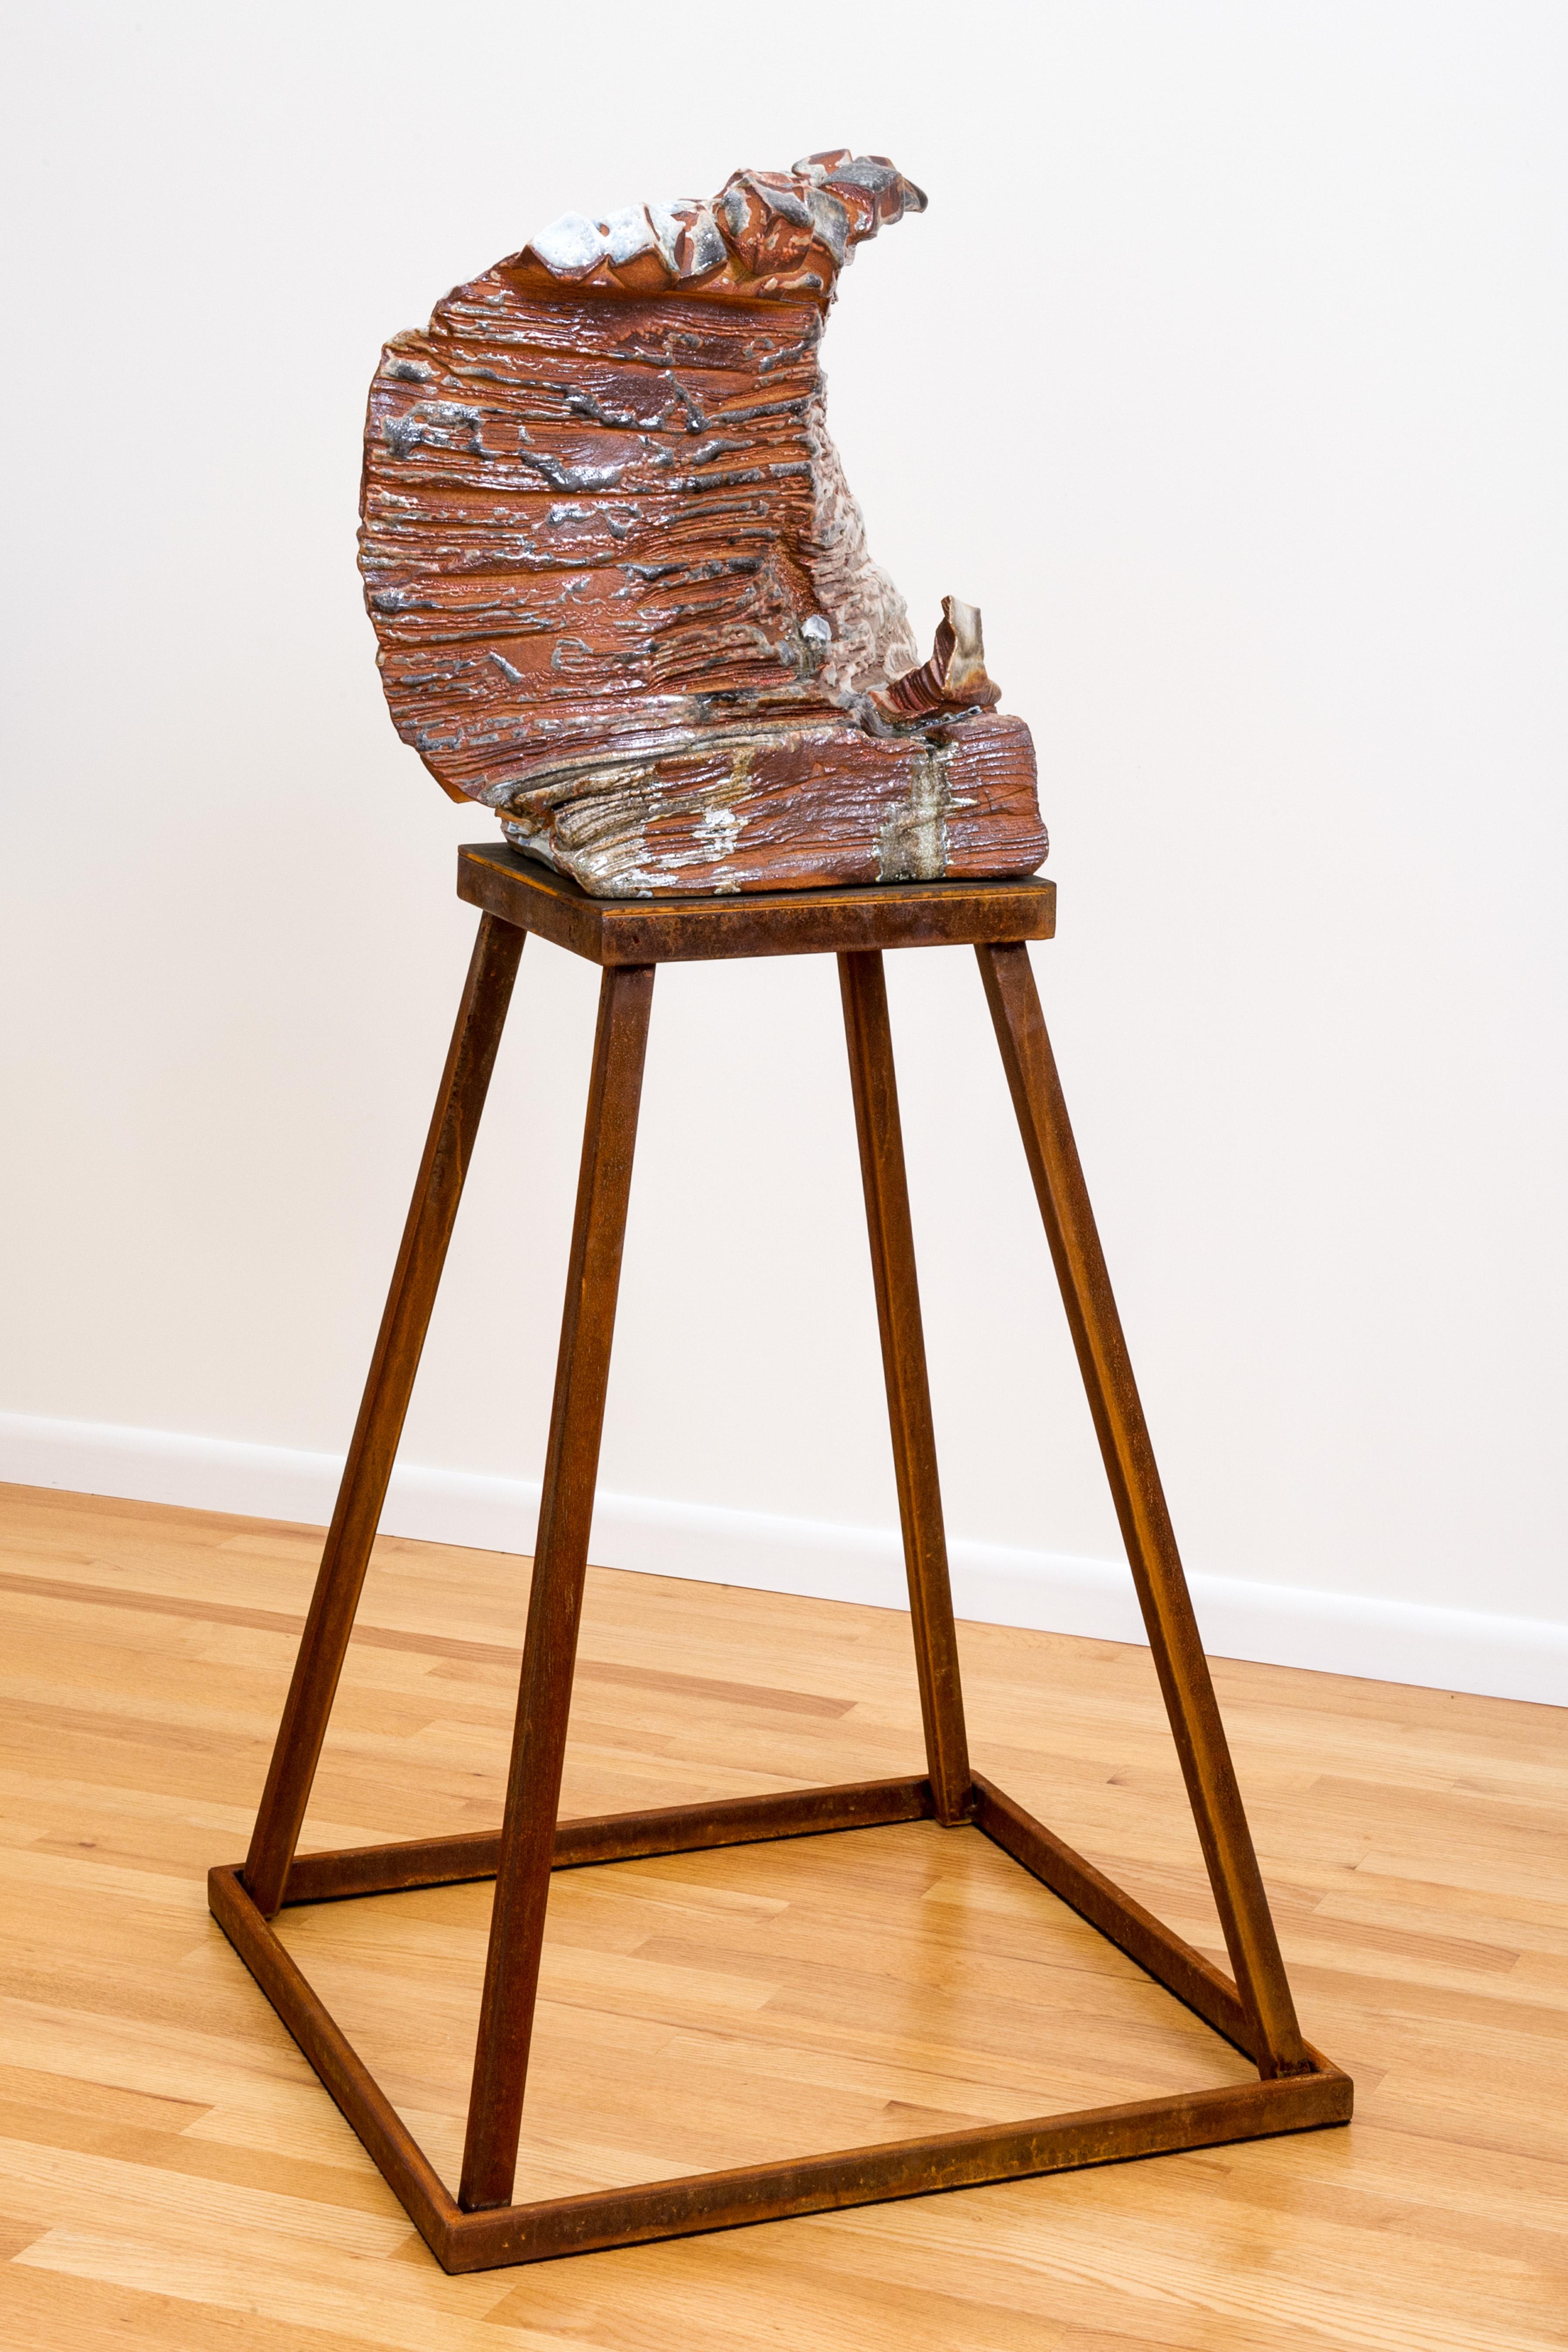 Large ceramic wood-fired sculpture: 'Apparition '